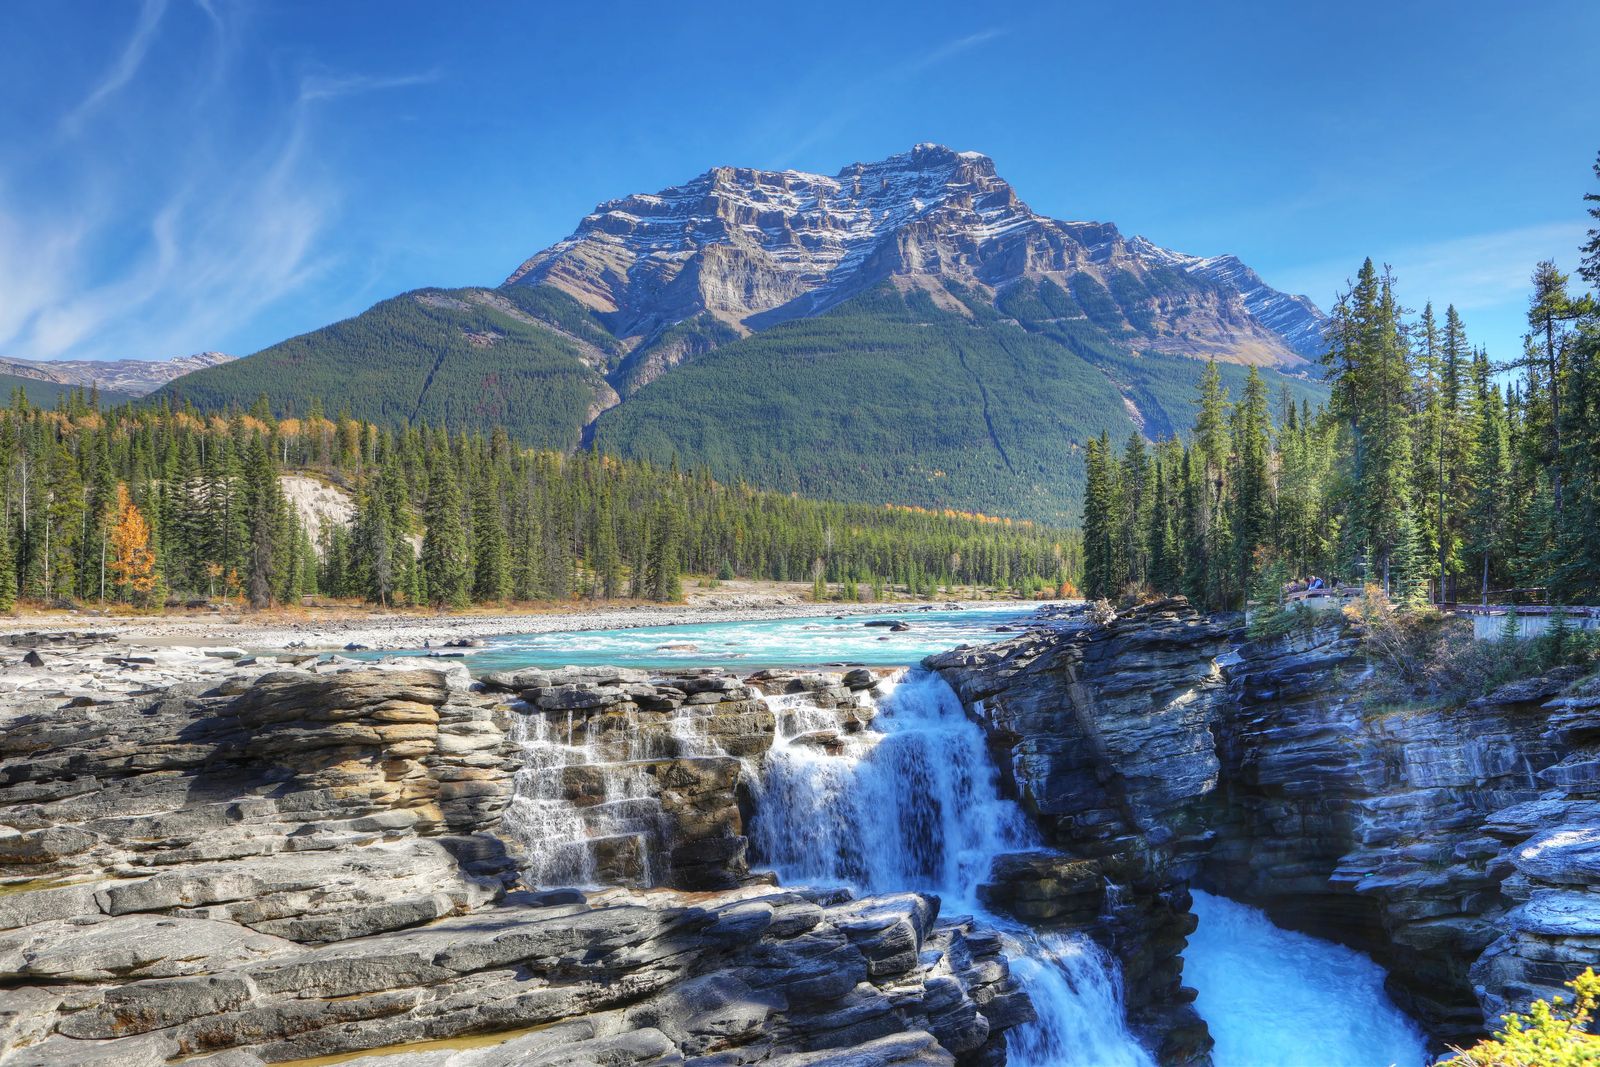 a wide but small waterfall cascades into a canyon below, this is Athabasca Falls - The BEST of the Icefields Parkway Banff